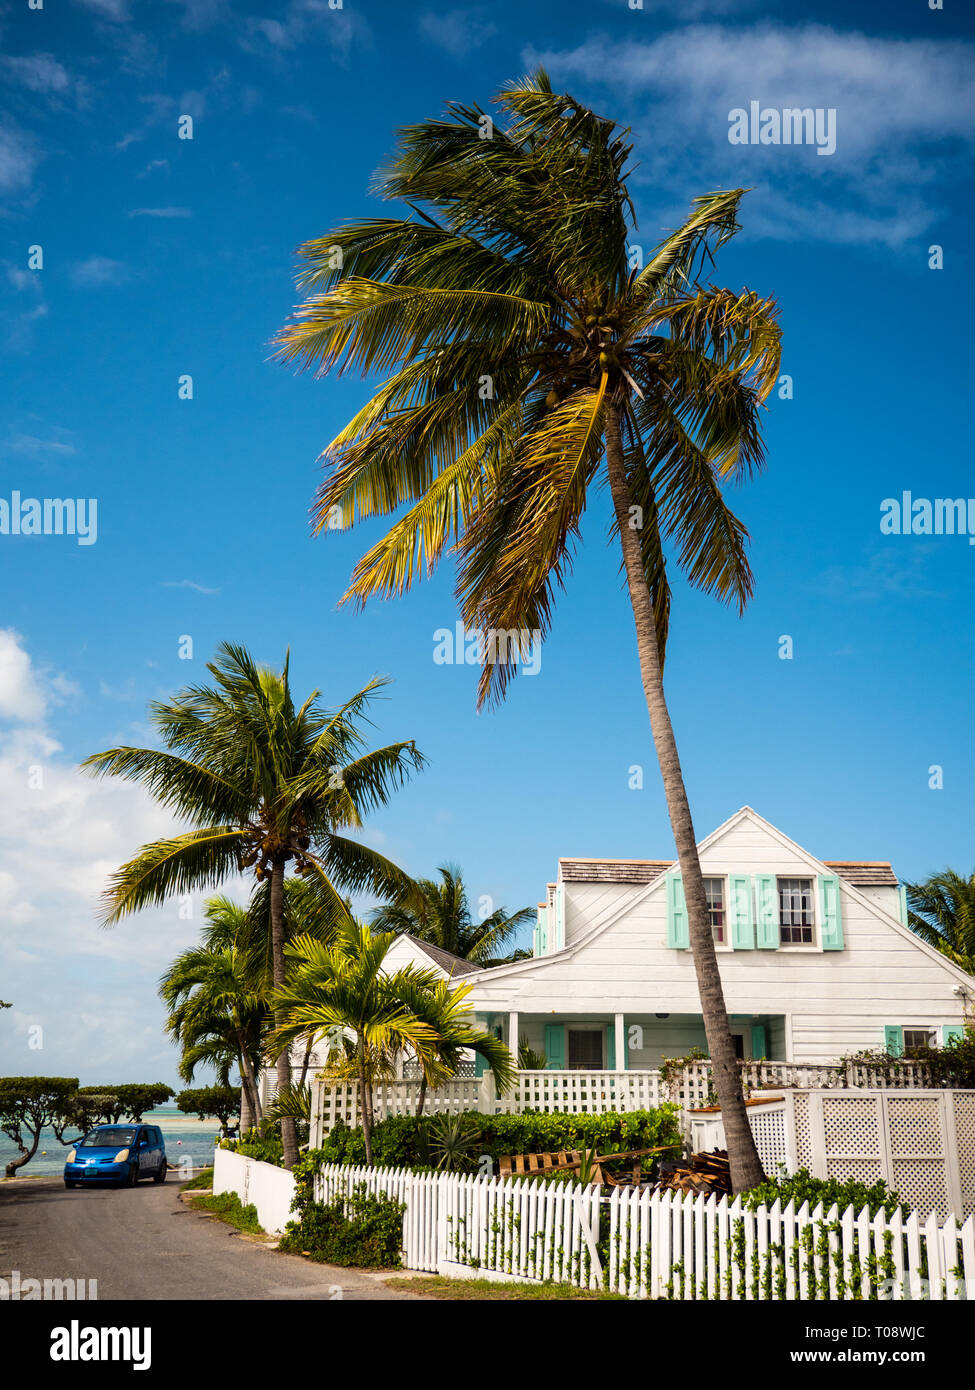 Tall Palm Tree next to Typical Bahamas House, Dunmore Town, Harbour Island, Eleuthera Island, The Bahamas, The Caribbean. Stock Photo